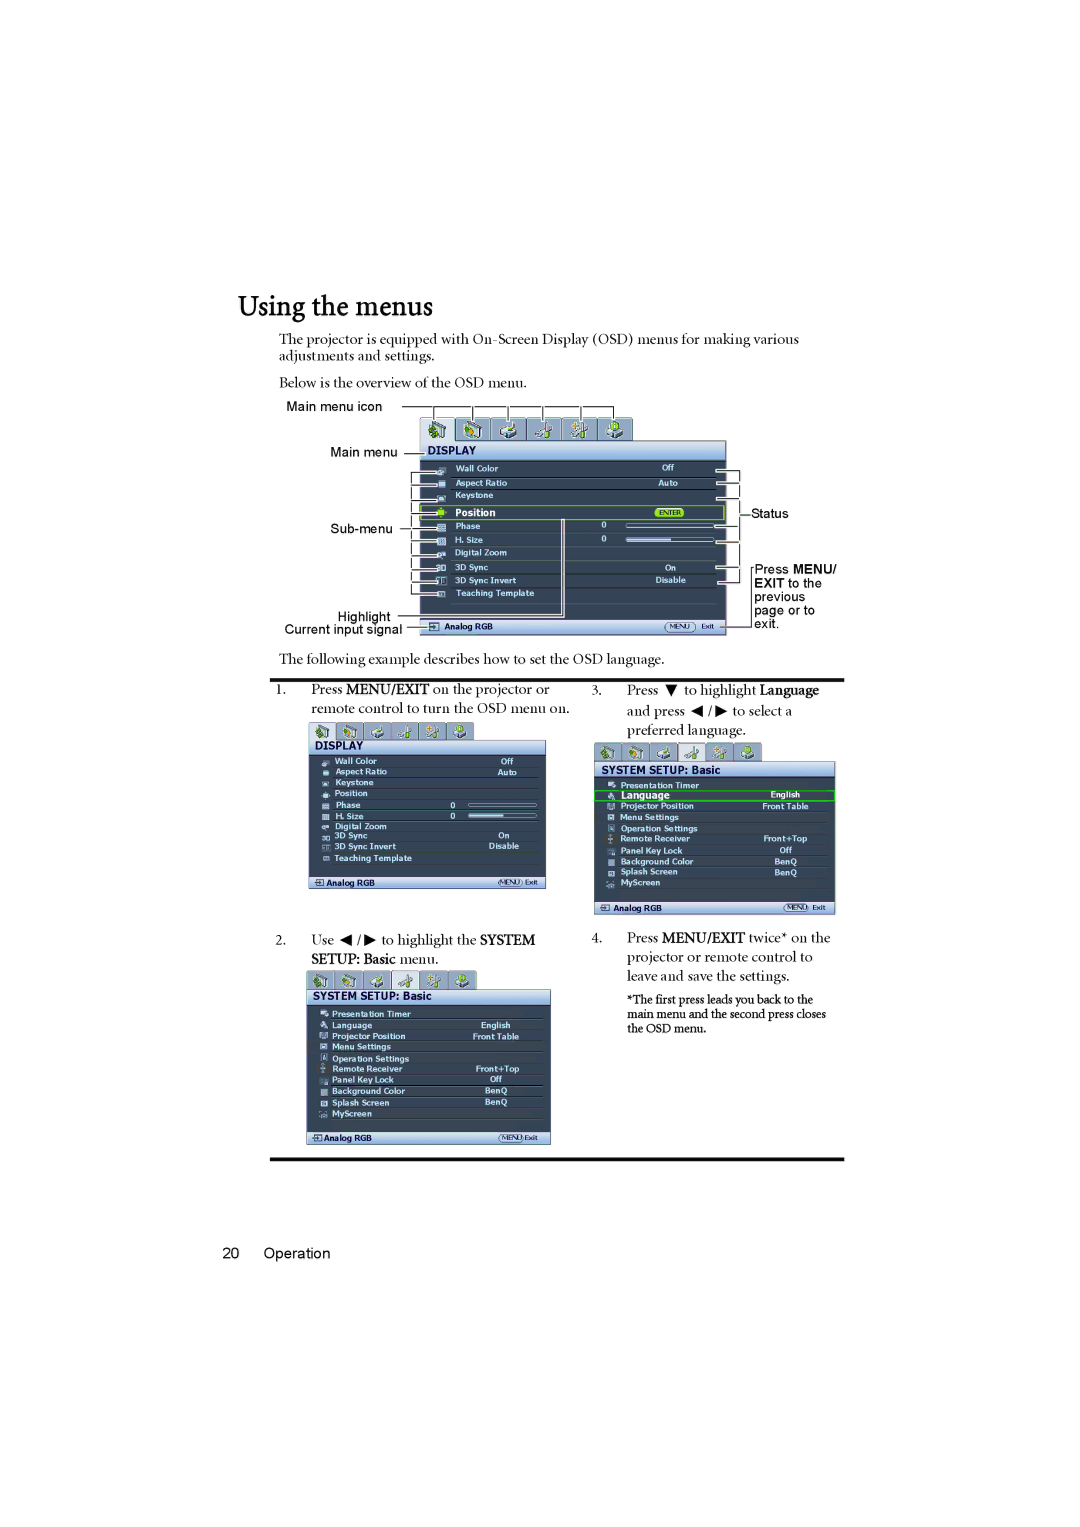 BenQ MX615, MS614 user manual Using the menus, Following example describes how to set the OSD language 